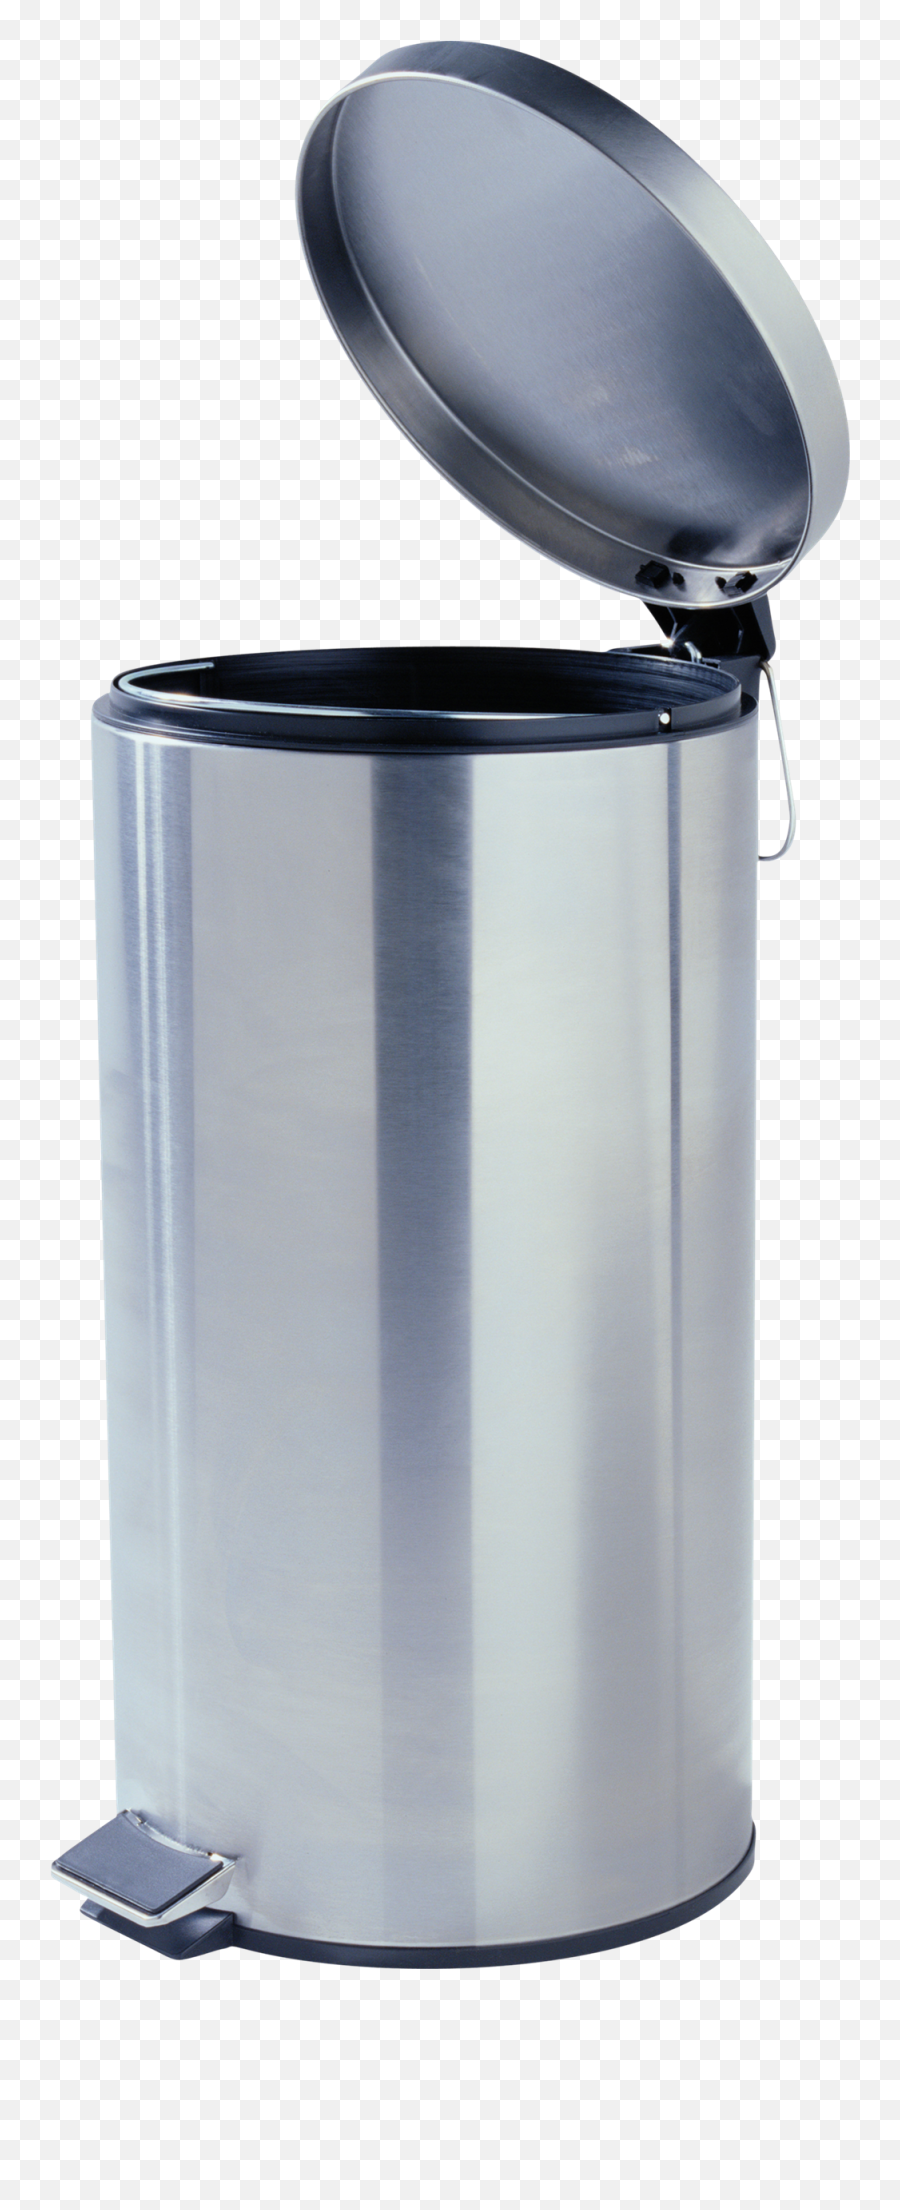 Download Trash Can Png Free Image - Lid,Trash Can Png